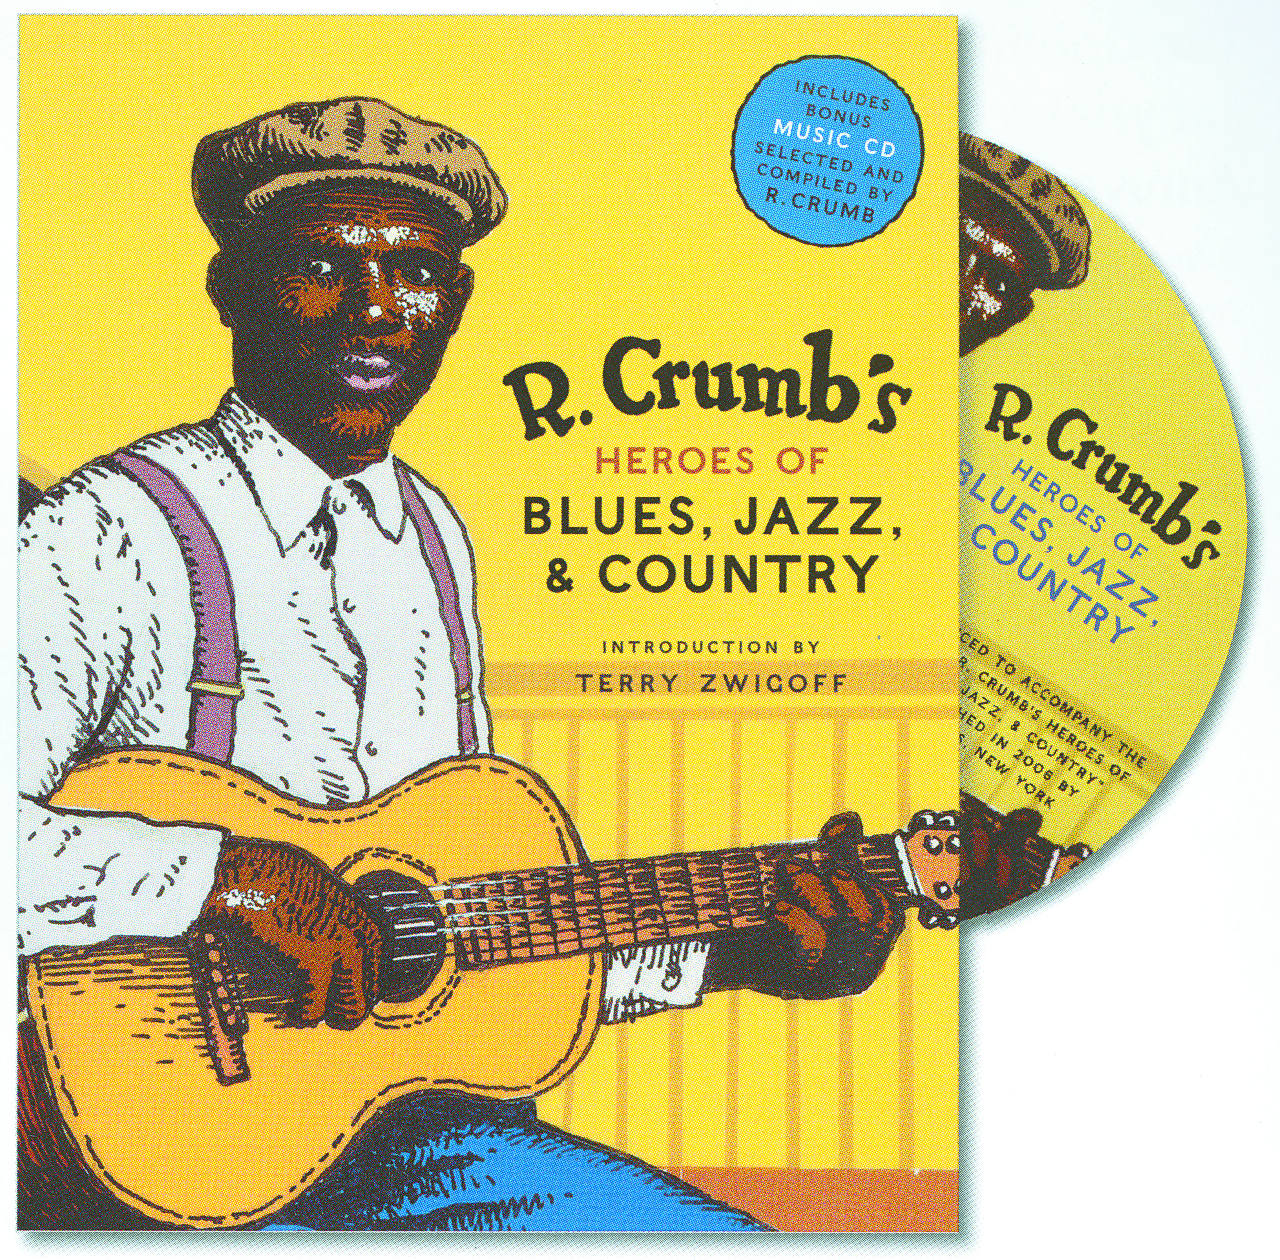 R CRUMBS HEROES OF BLUES JAZZ & COUNTRY WITH CD HC